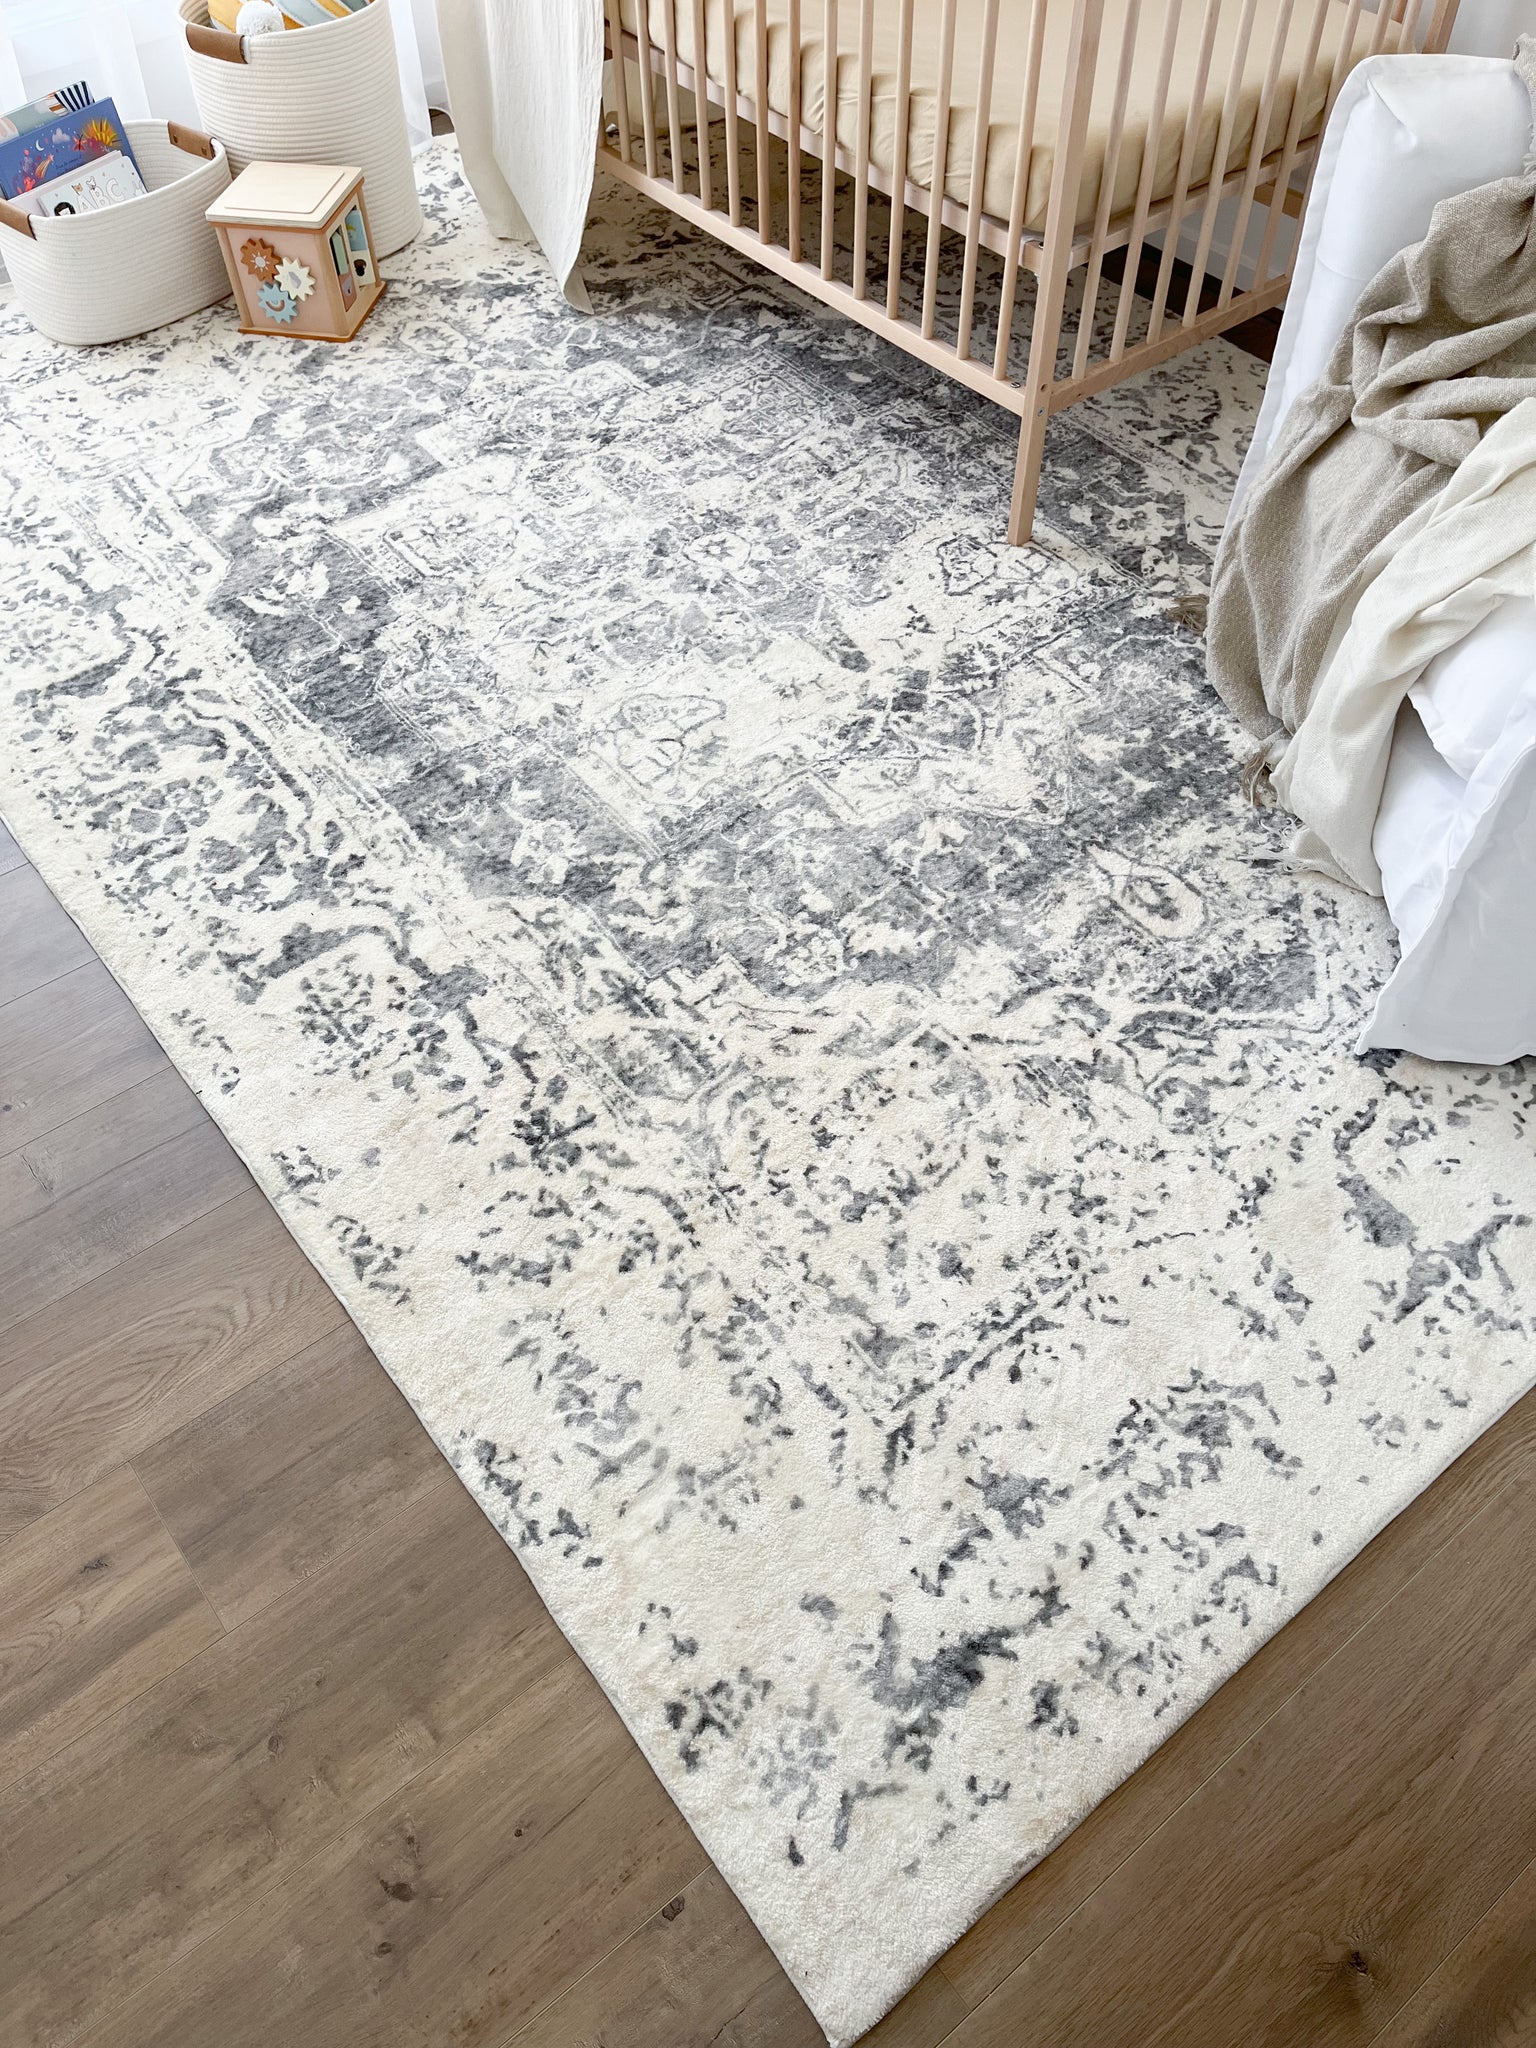 What Color Rug Goes With Grey Floor: Find the Perfect Match